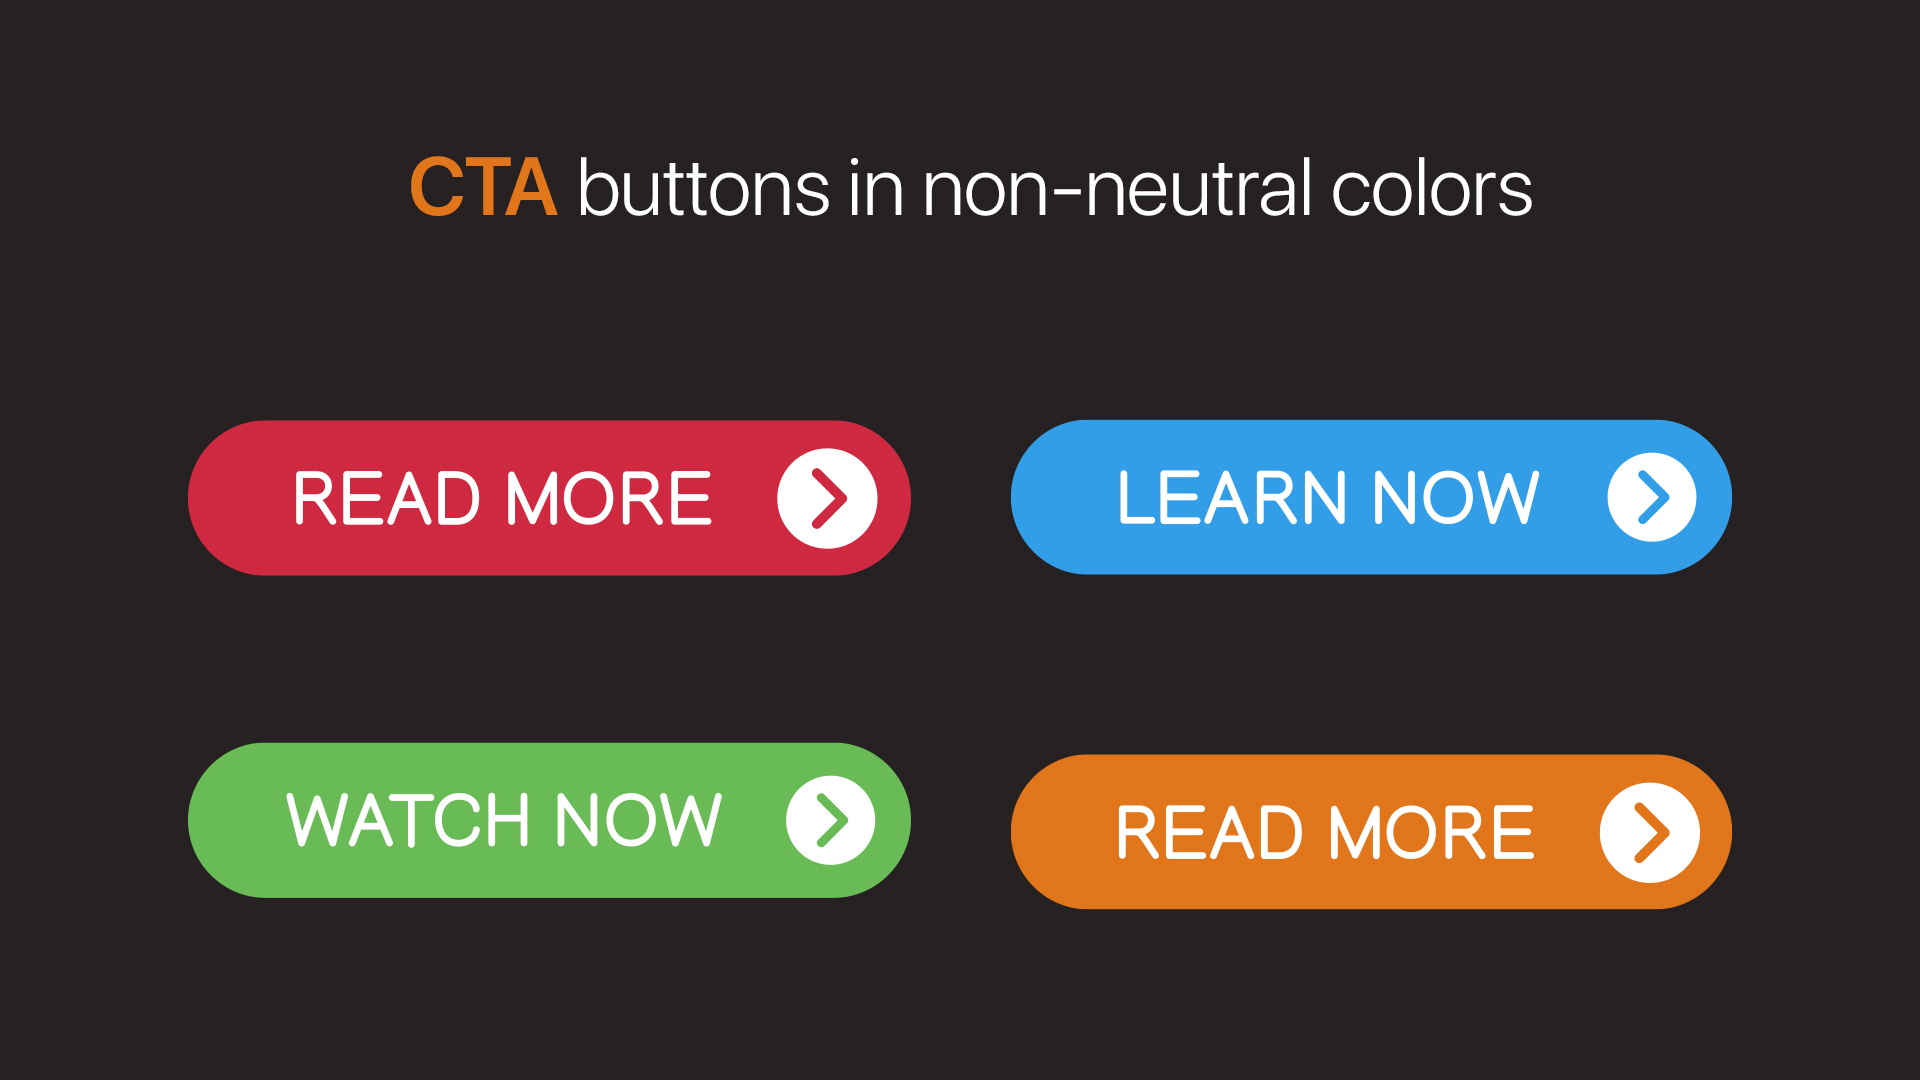 CTA buttons with non-neutral colors as background